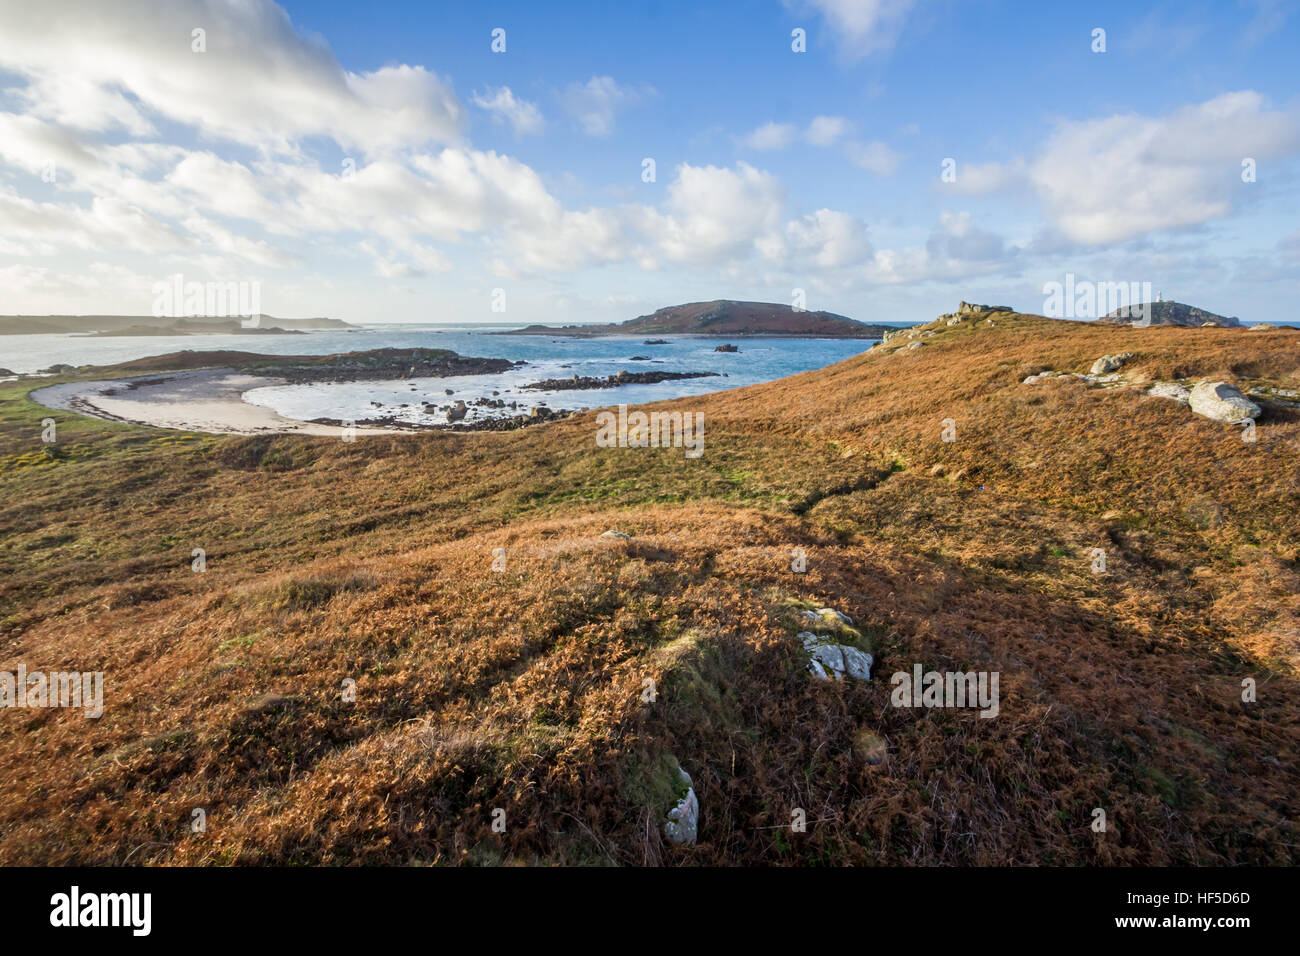 The uninhabited island of Tean with surrounding islands, Isles of Scilly, January 2015 Stock Photo